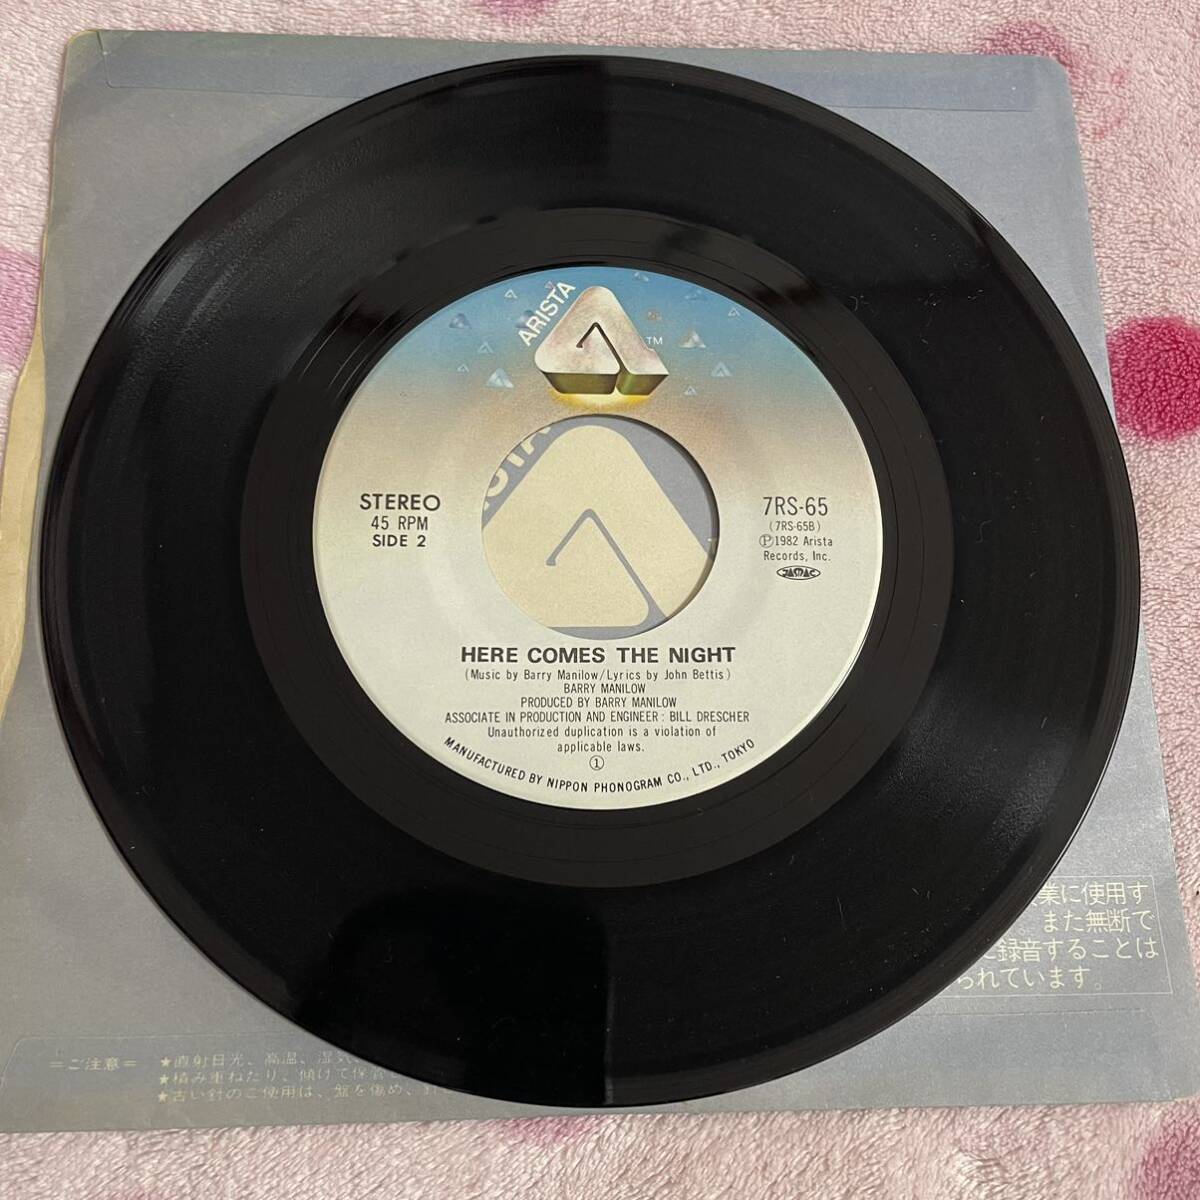 【7inch】◆即決◆美盤 中古■【Barry Manilow / Some Kind Of Friend 君は恋フレンド / Here Comes The Night】7インチ EP■7RS65_画像7